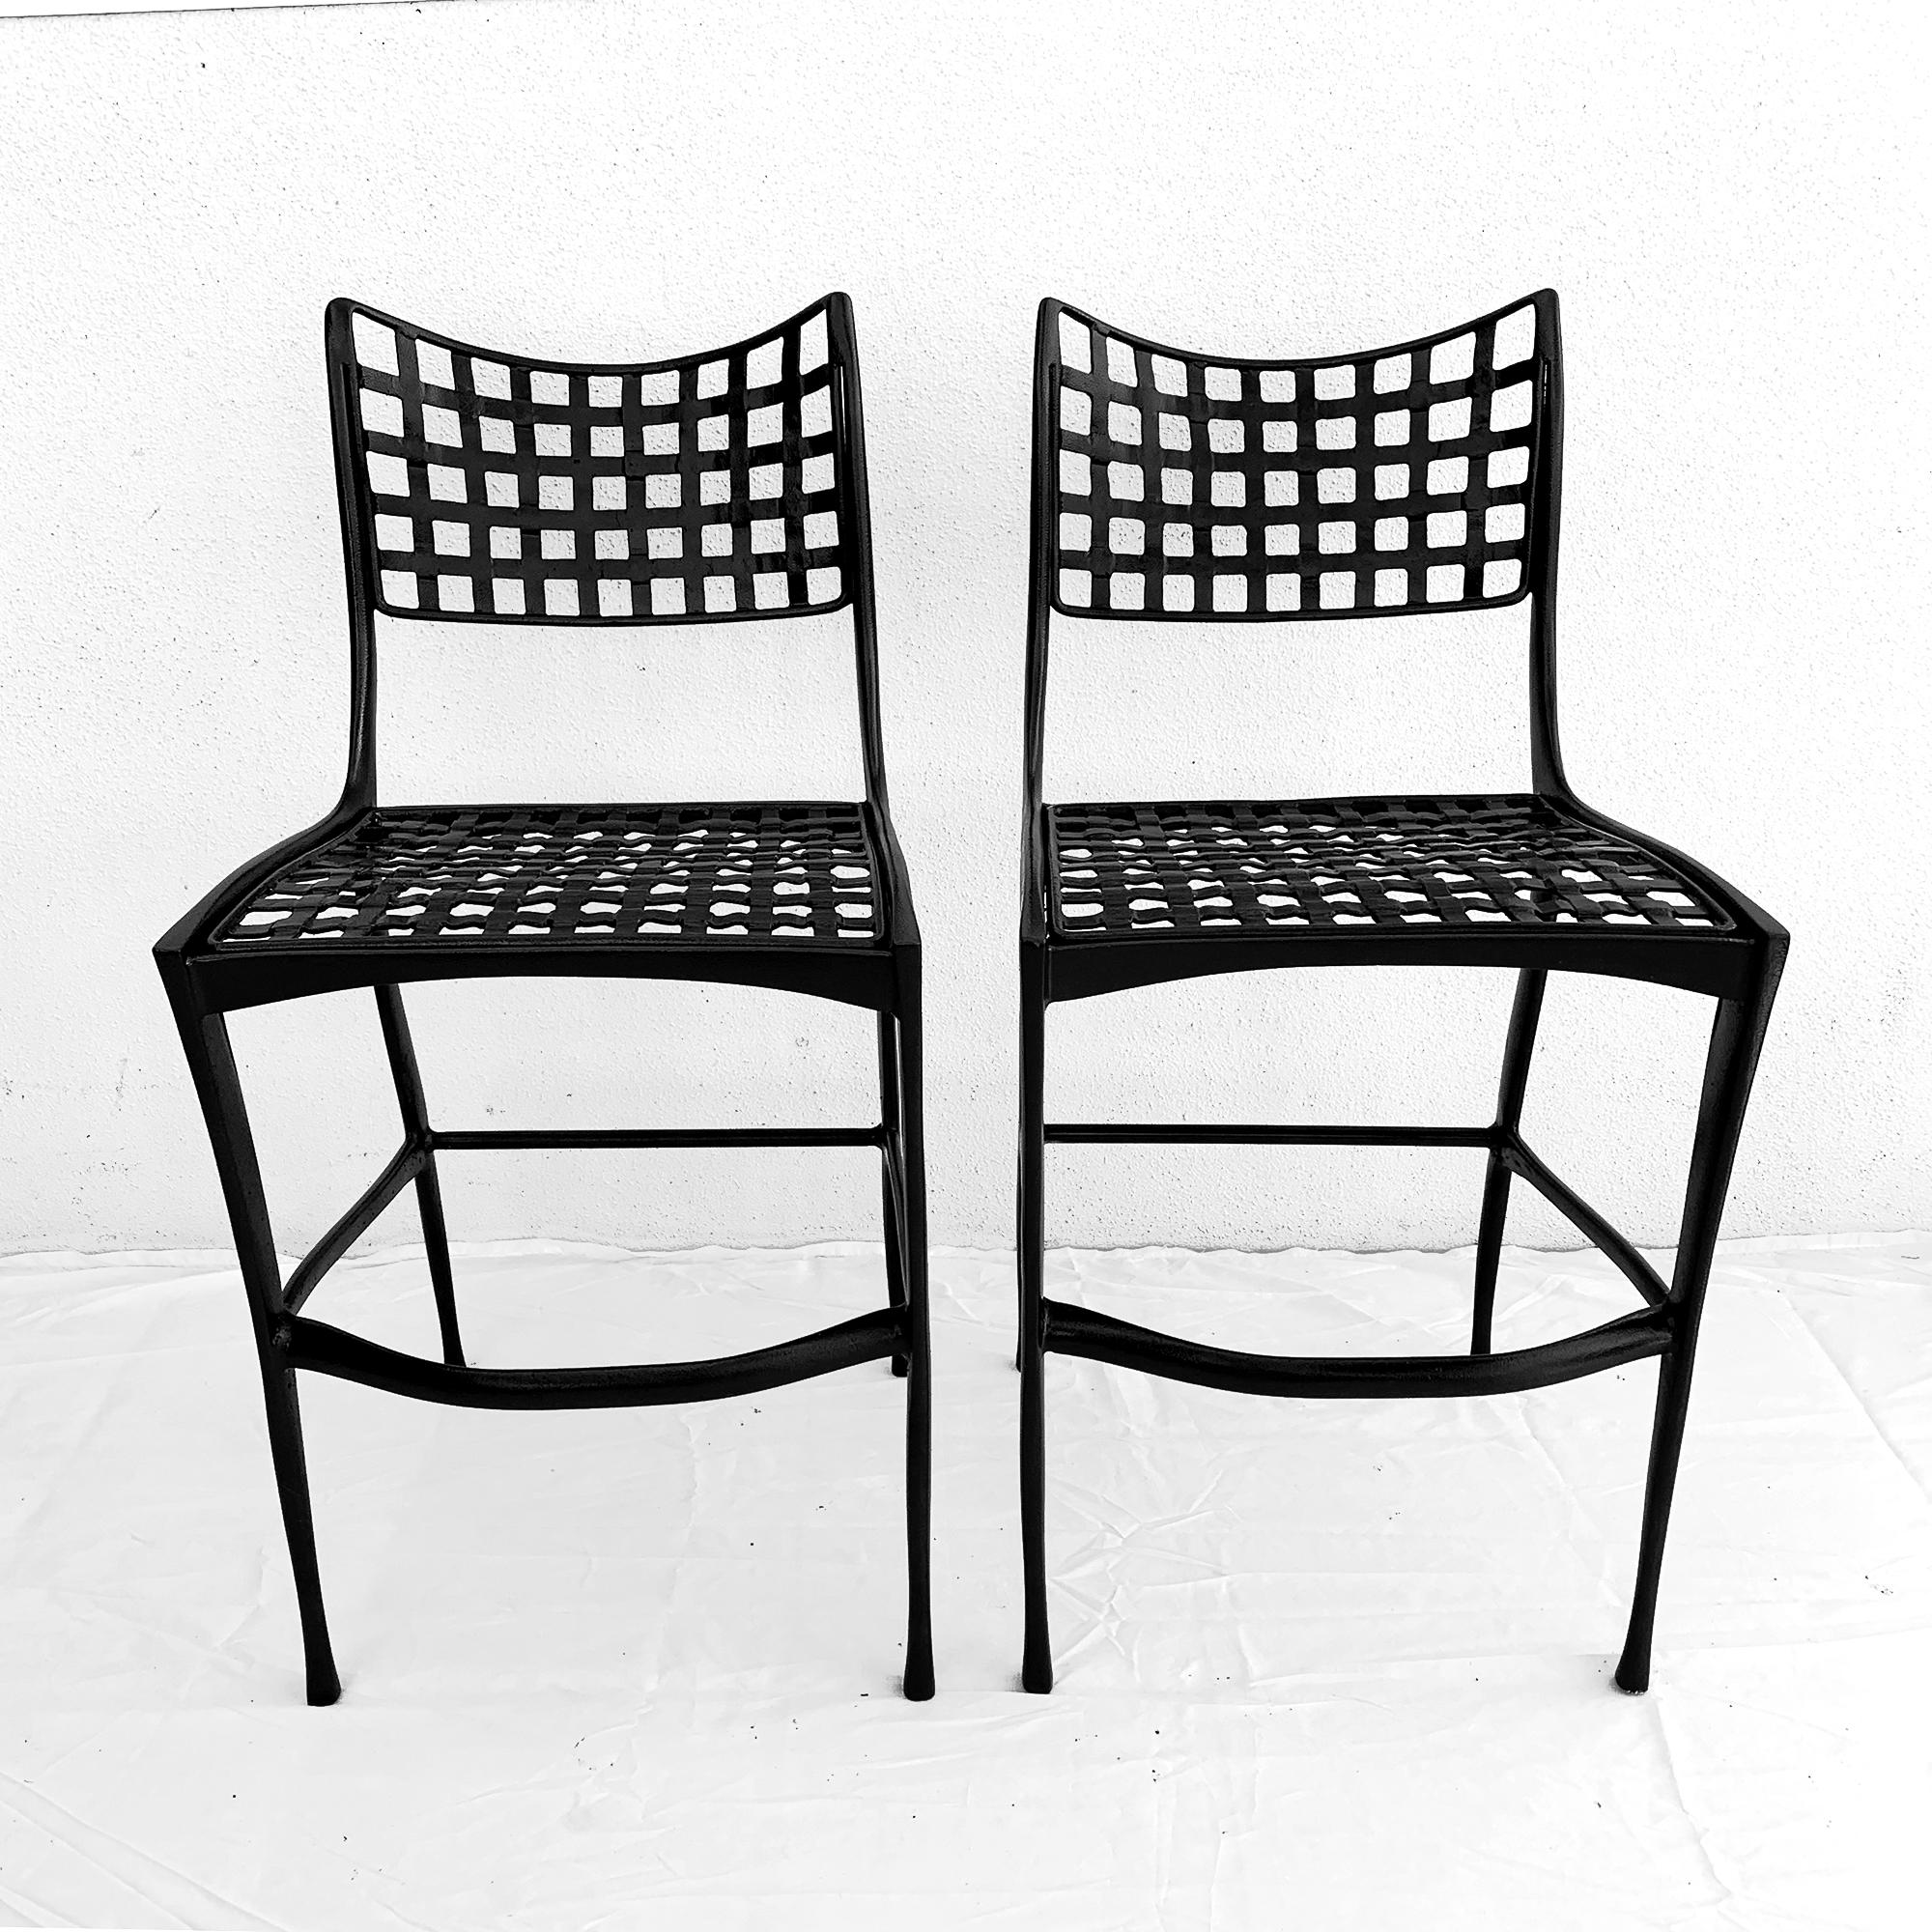 Hard to find set of 2 Brown Jordan Sol y Luna Gazelle counter height bar stools designed by Dan Johnson.   Cast aluminum black version, use these bar stools inside or out. Good vintage condition.  Great addition to your mid century modern home or